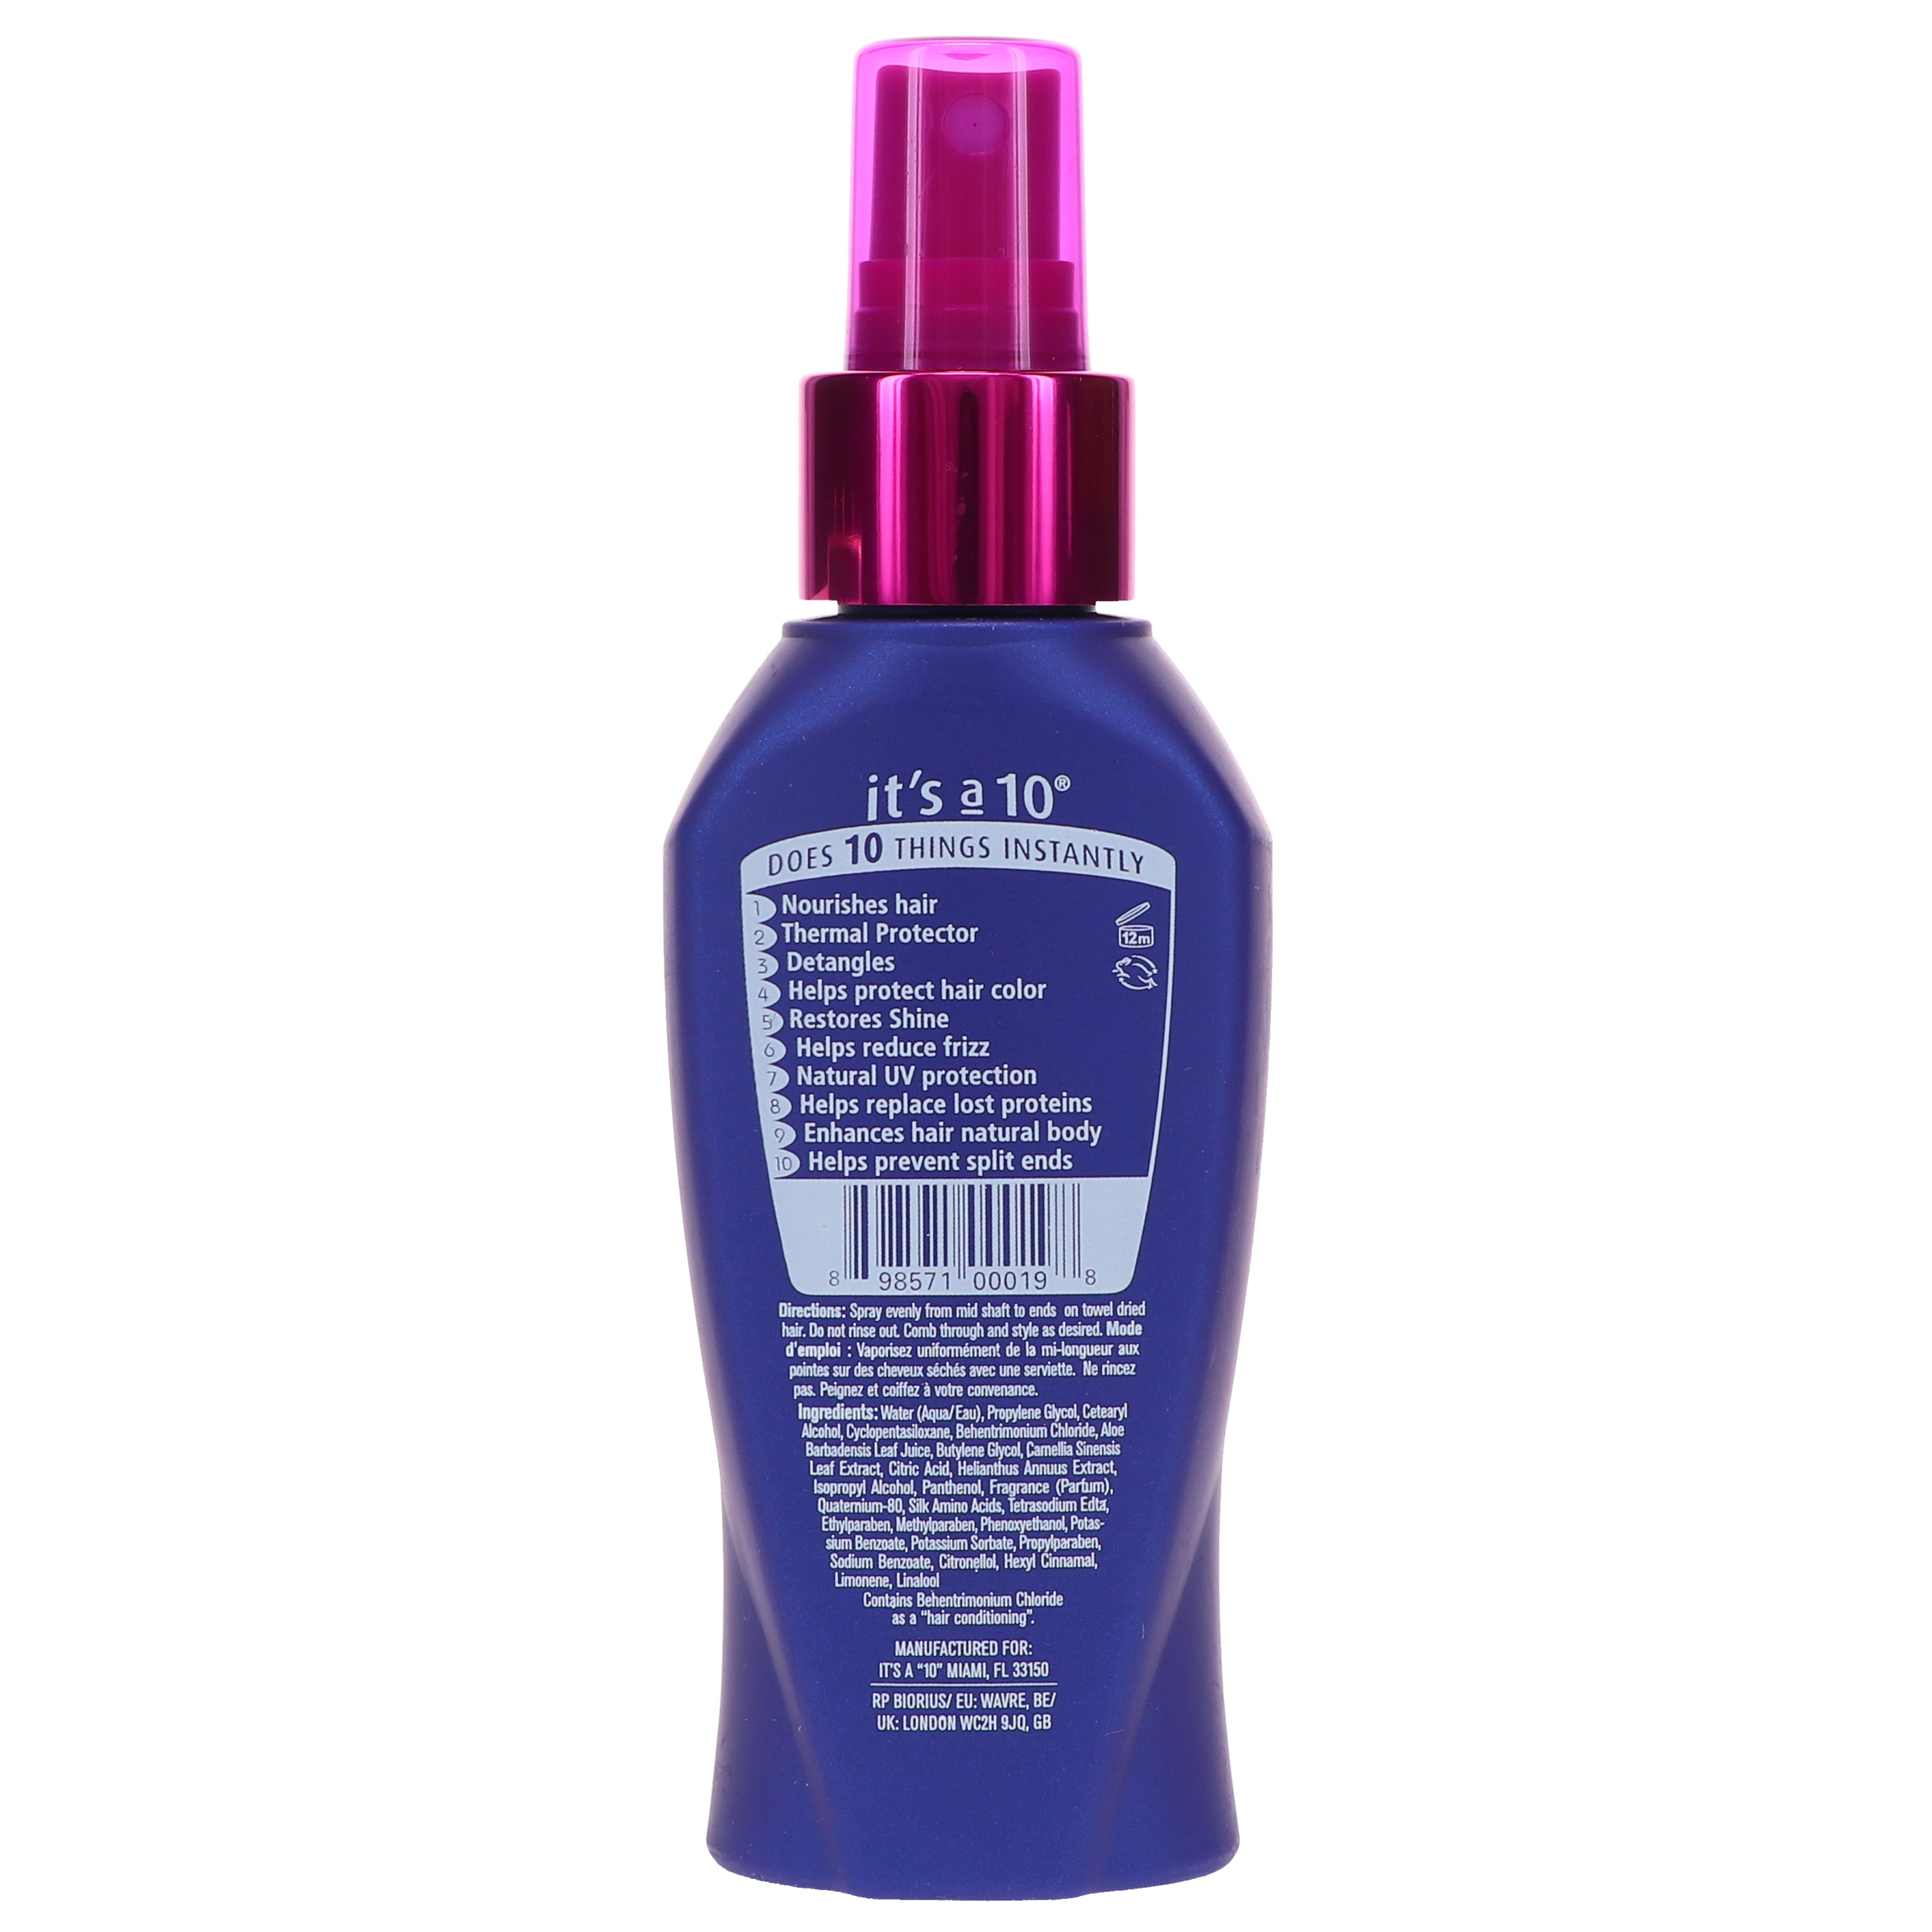 It's a 10 Miracle Leave-in Product 4 oz - image 5 of 8